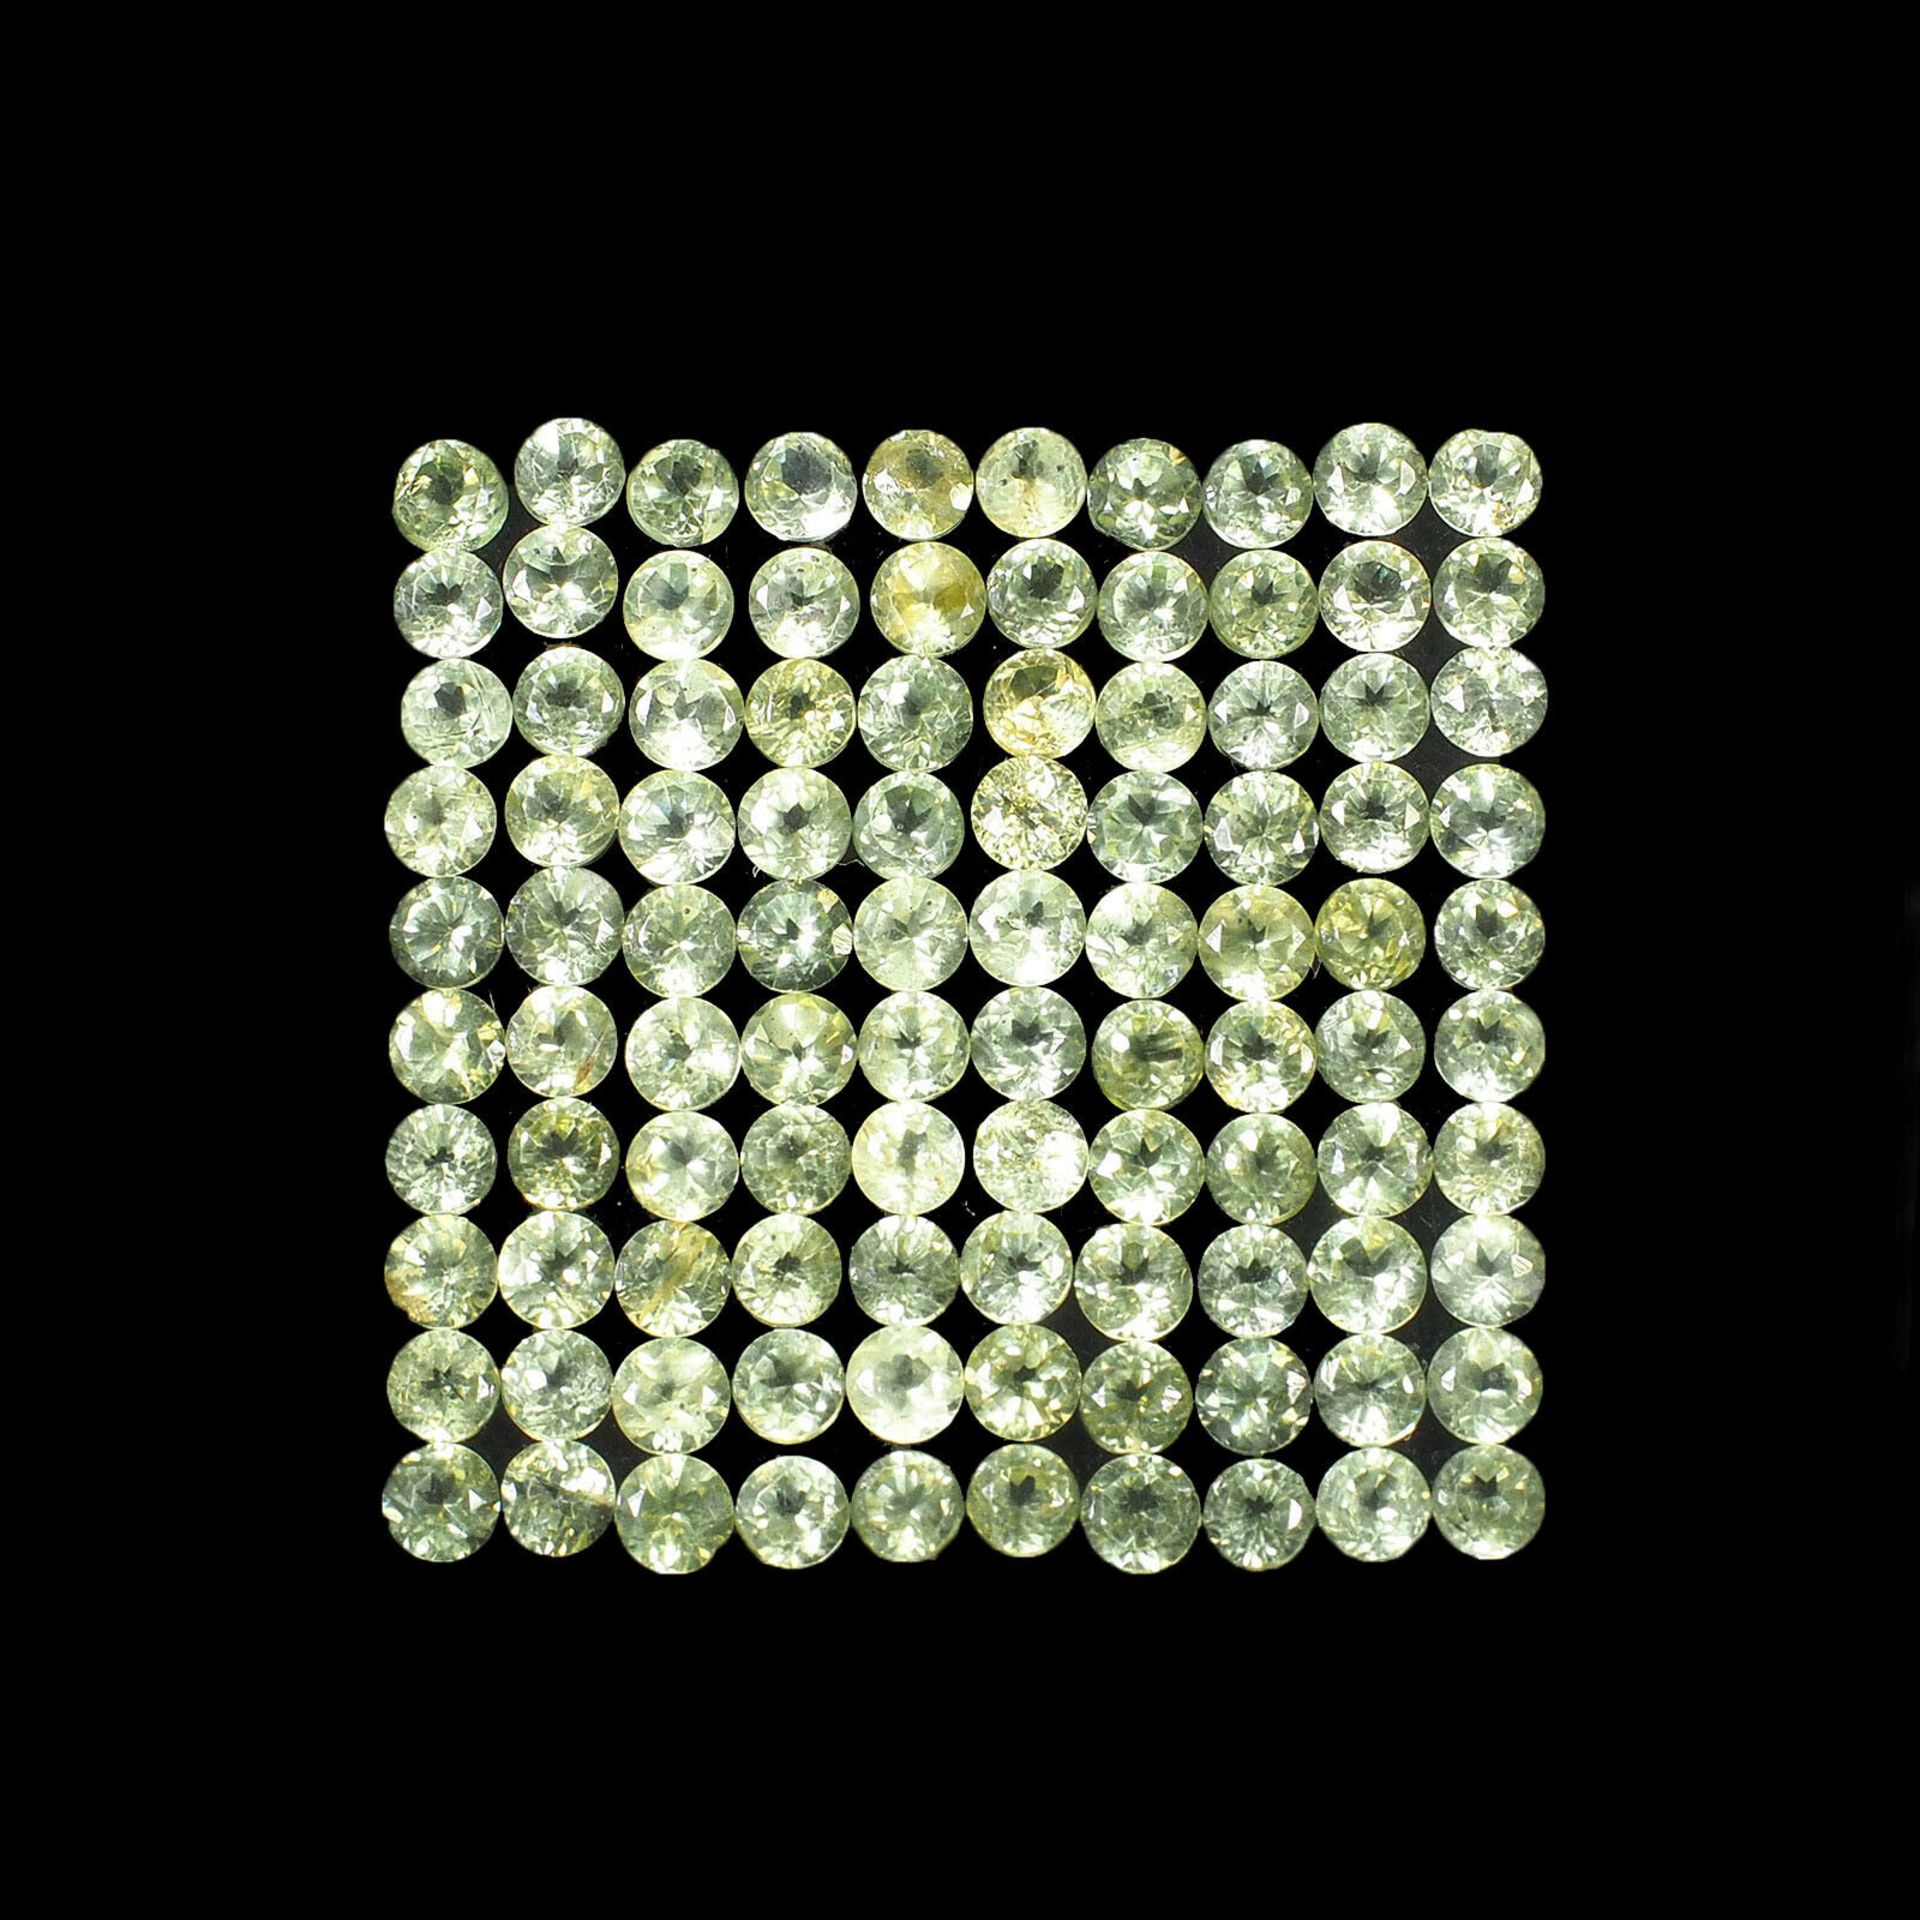 IGL&I Certified, A Company part of the GIA organisation, Natural Peridot 4.00 carat 100 pieces. This